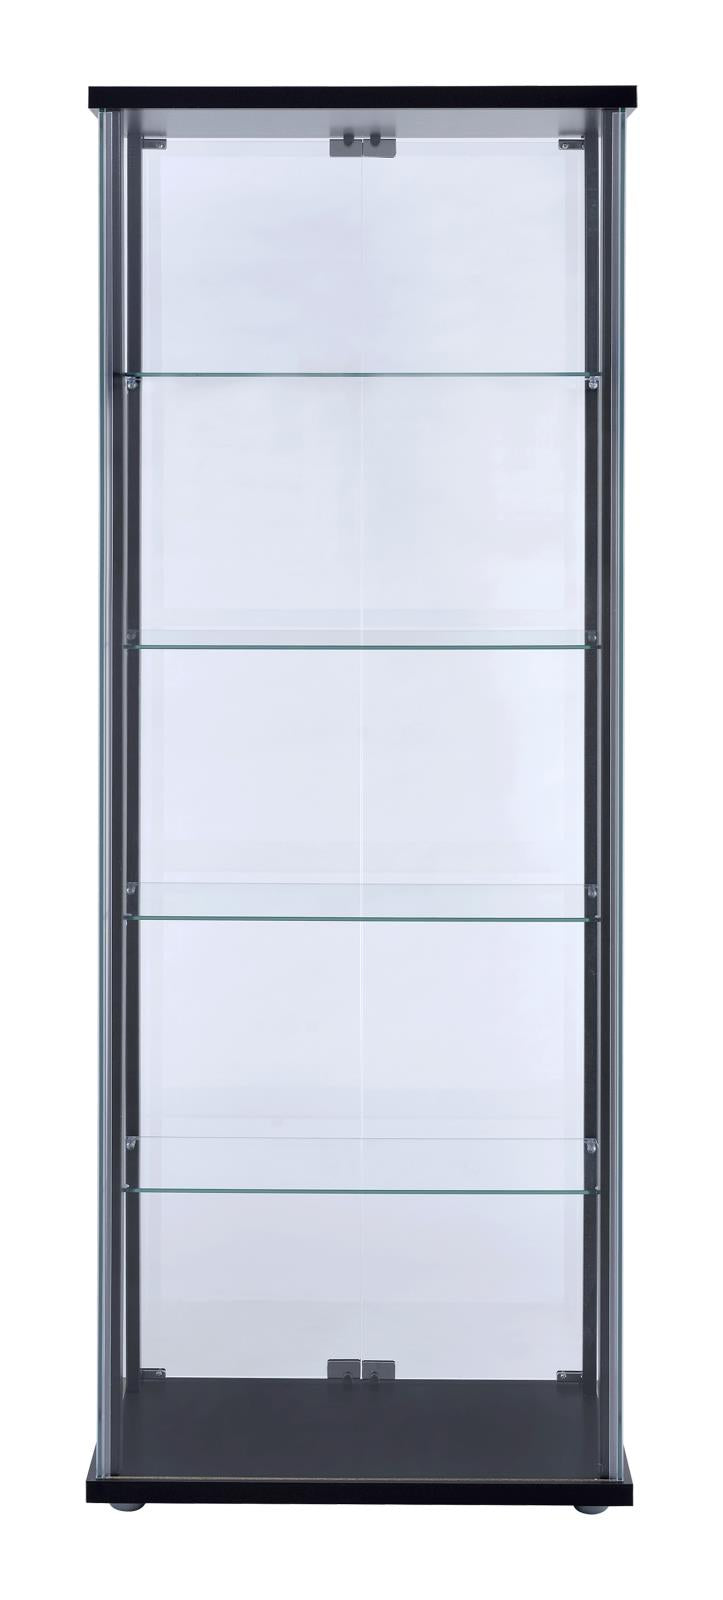 5-shelf Glass Curio Cabinet Black and Clear - What A Room